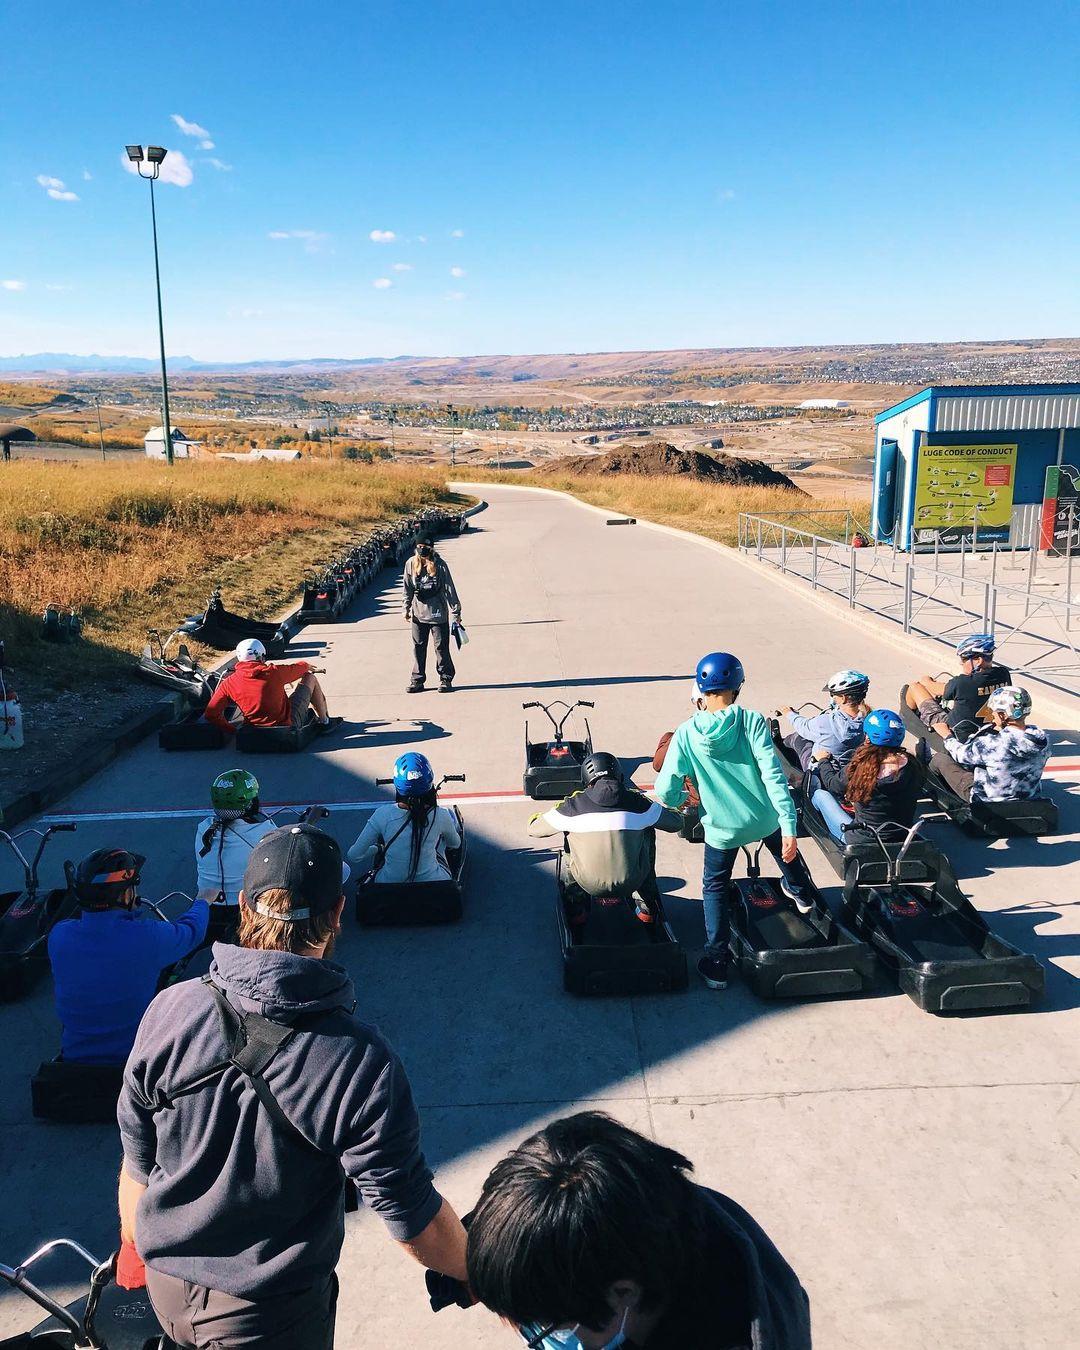 An overview shot of the Downhill Karting Calgary instruction area.